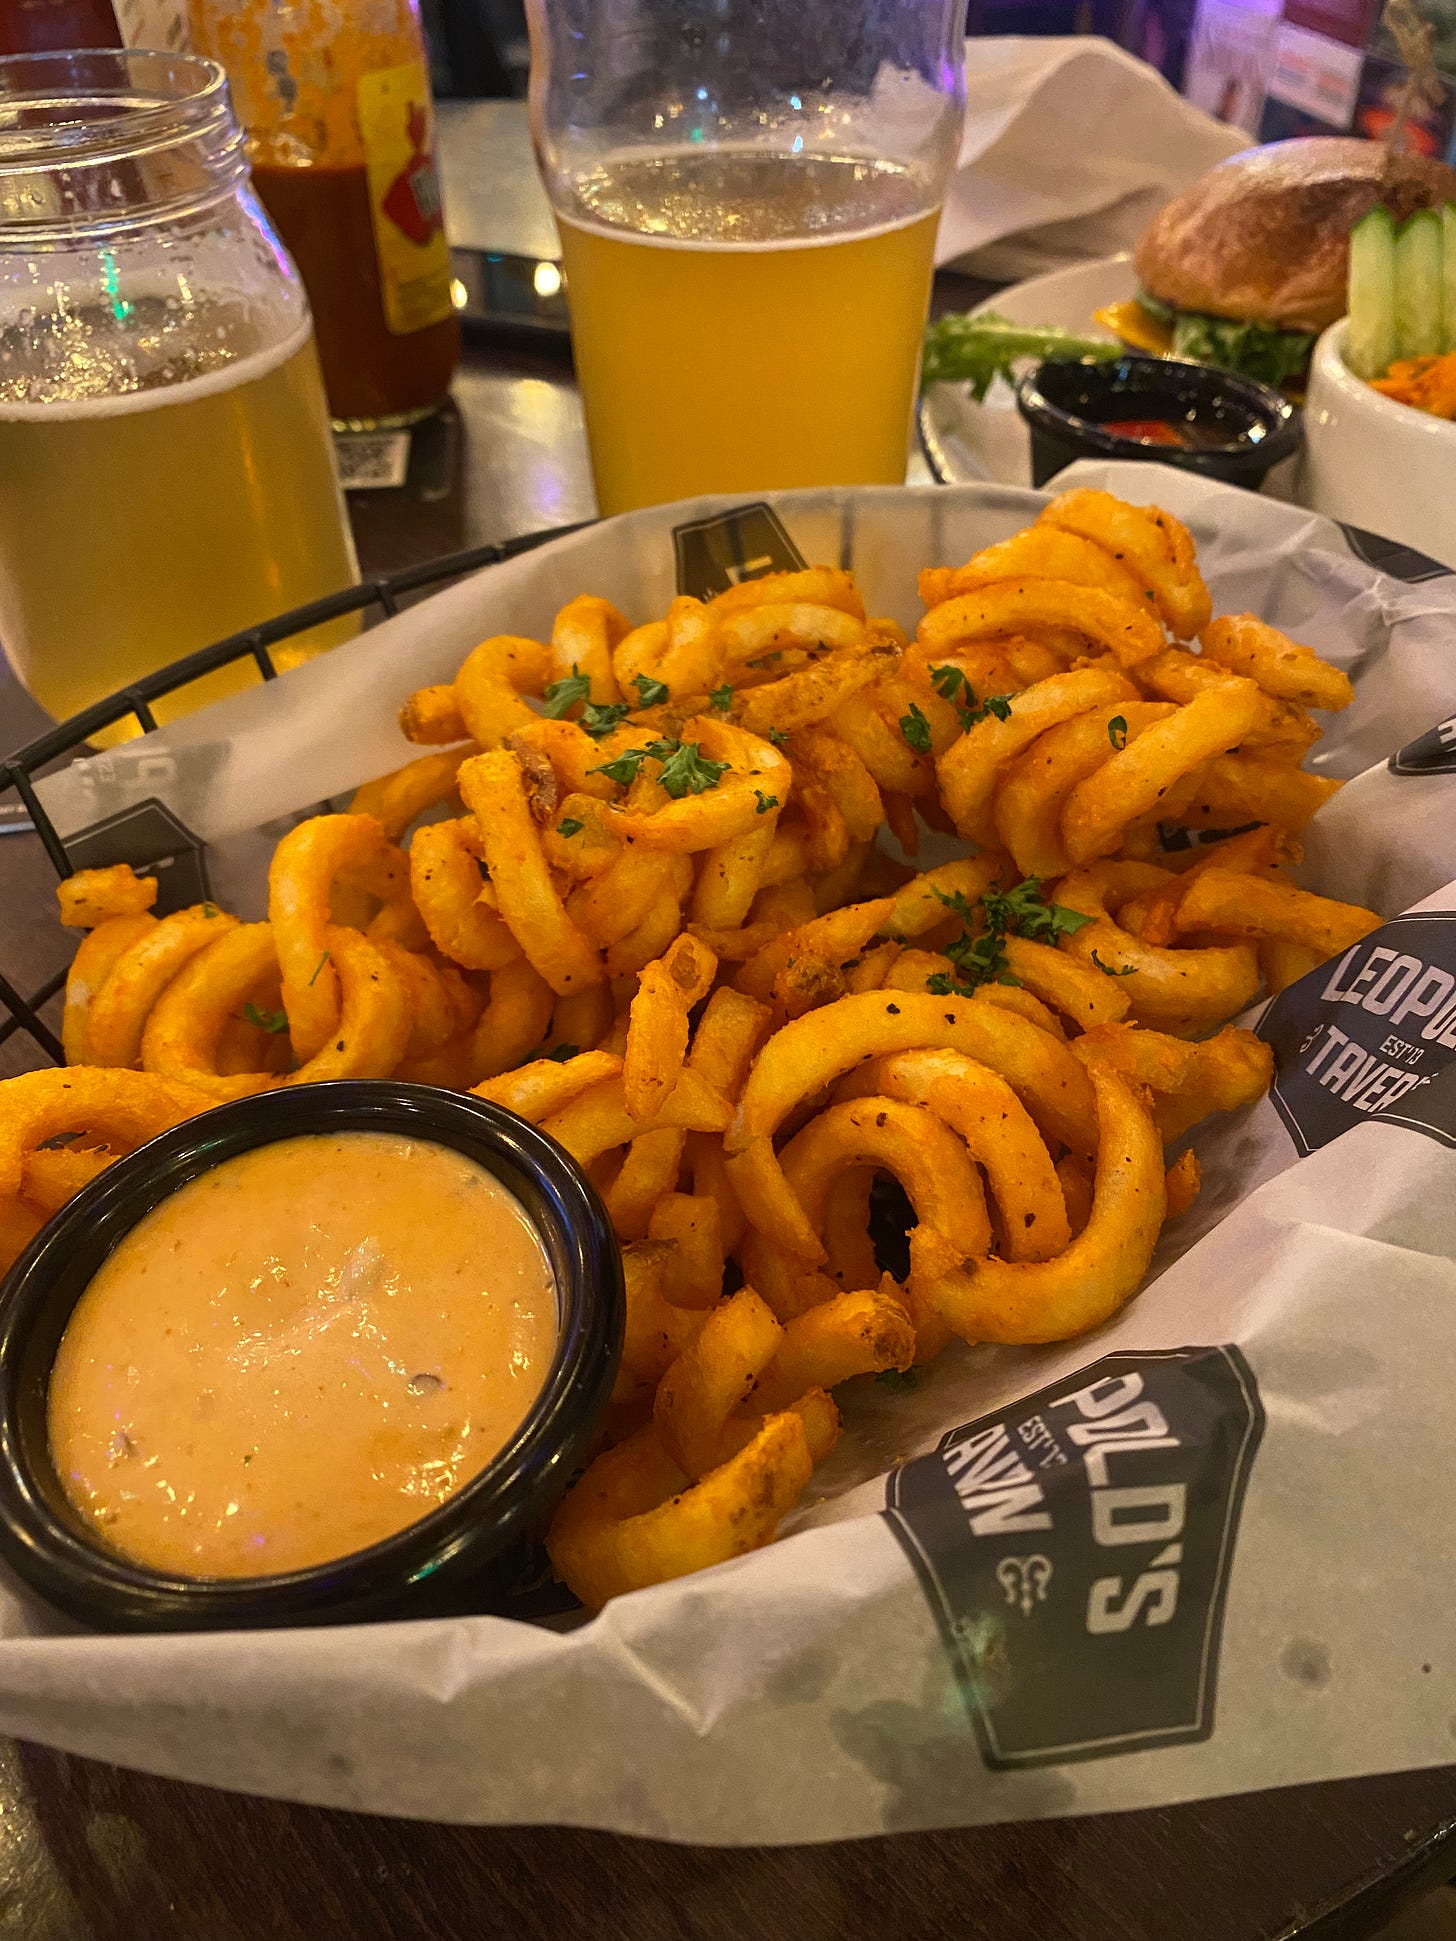 A basket of seasoned curly fries with a small ramekin of chipotle mayo. In the background are two glasses of beer and a bottle of hot sauce.